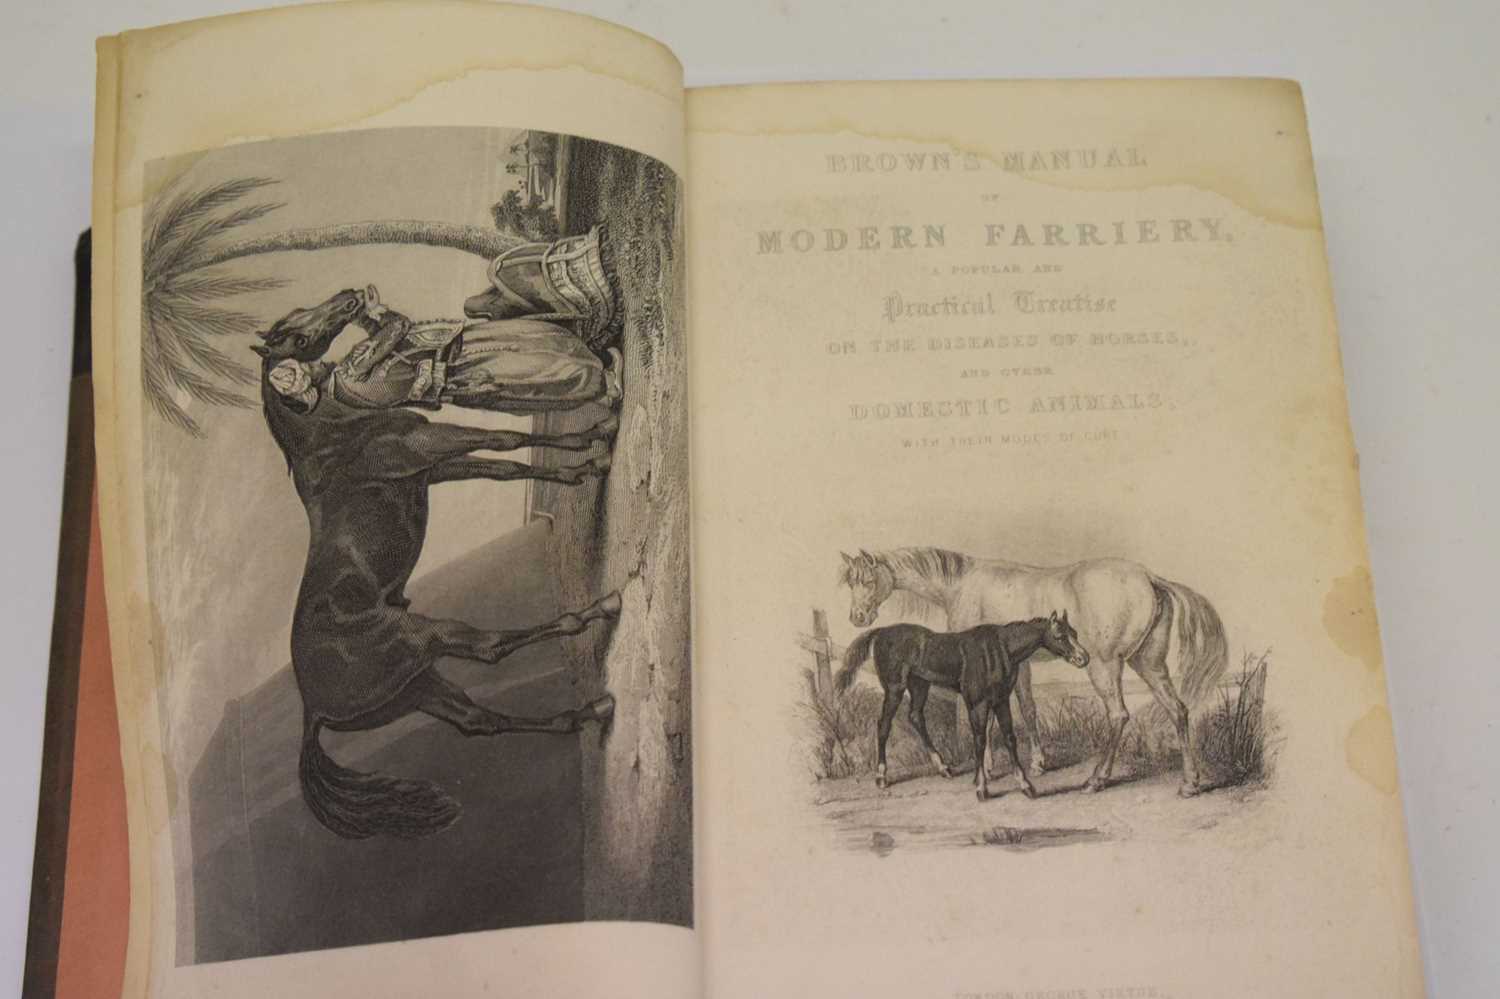 Brown, Thpmas, M.P.S. - 'Manual of Modern Farriery' - Image 2 of 8